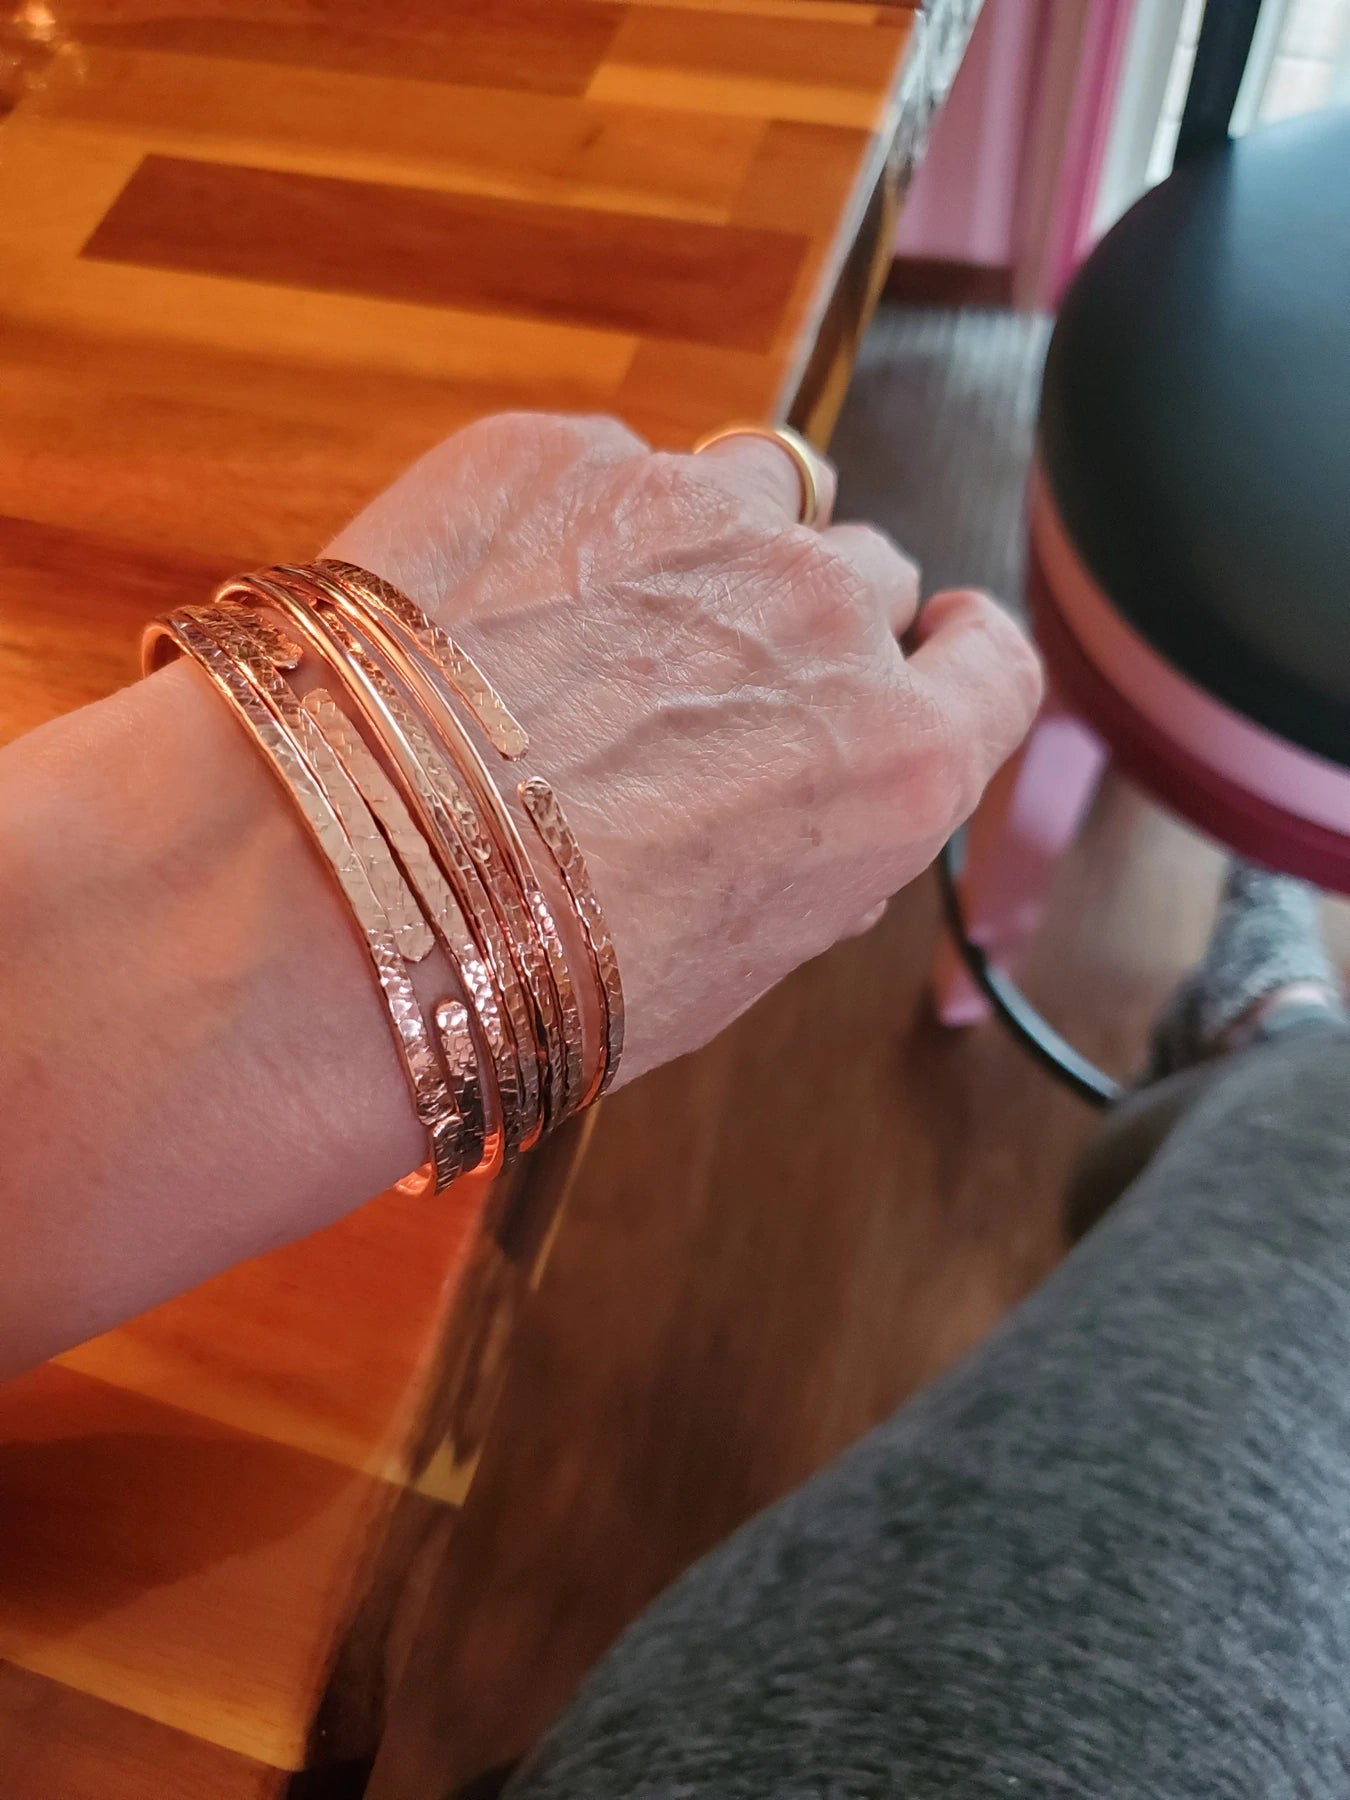 As Seen In Brides-Bare Copper Hammer Textured Bangle Now 3 Sizes